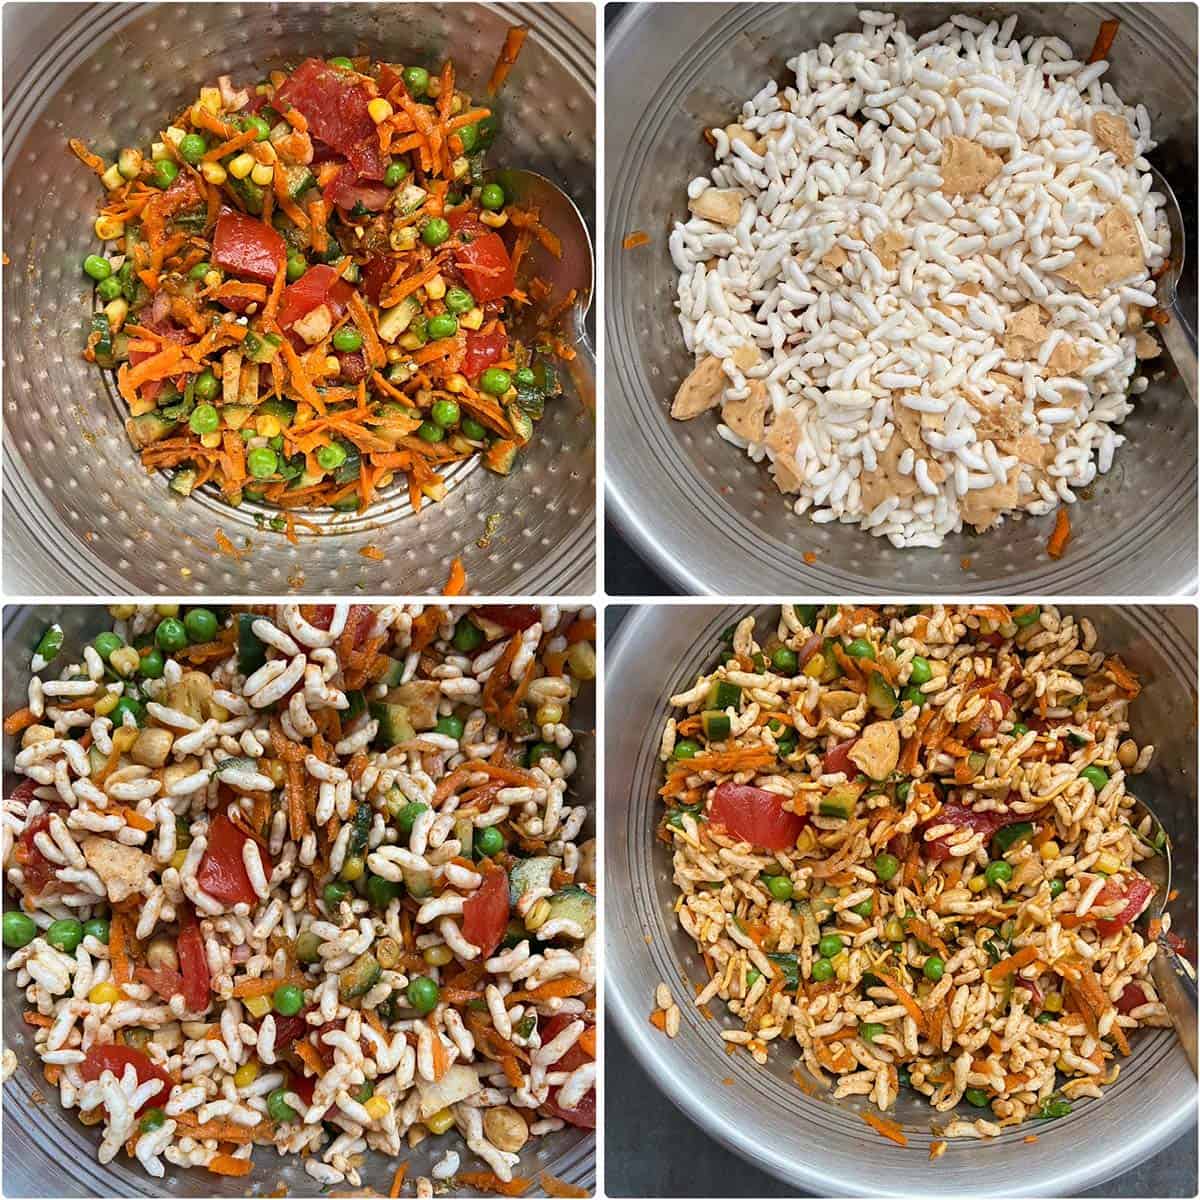 4 panel photo showing the mixing of ingredients.